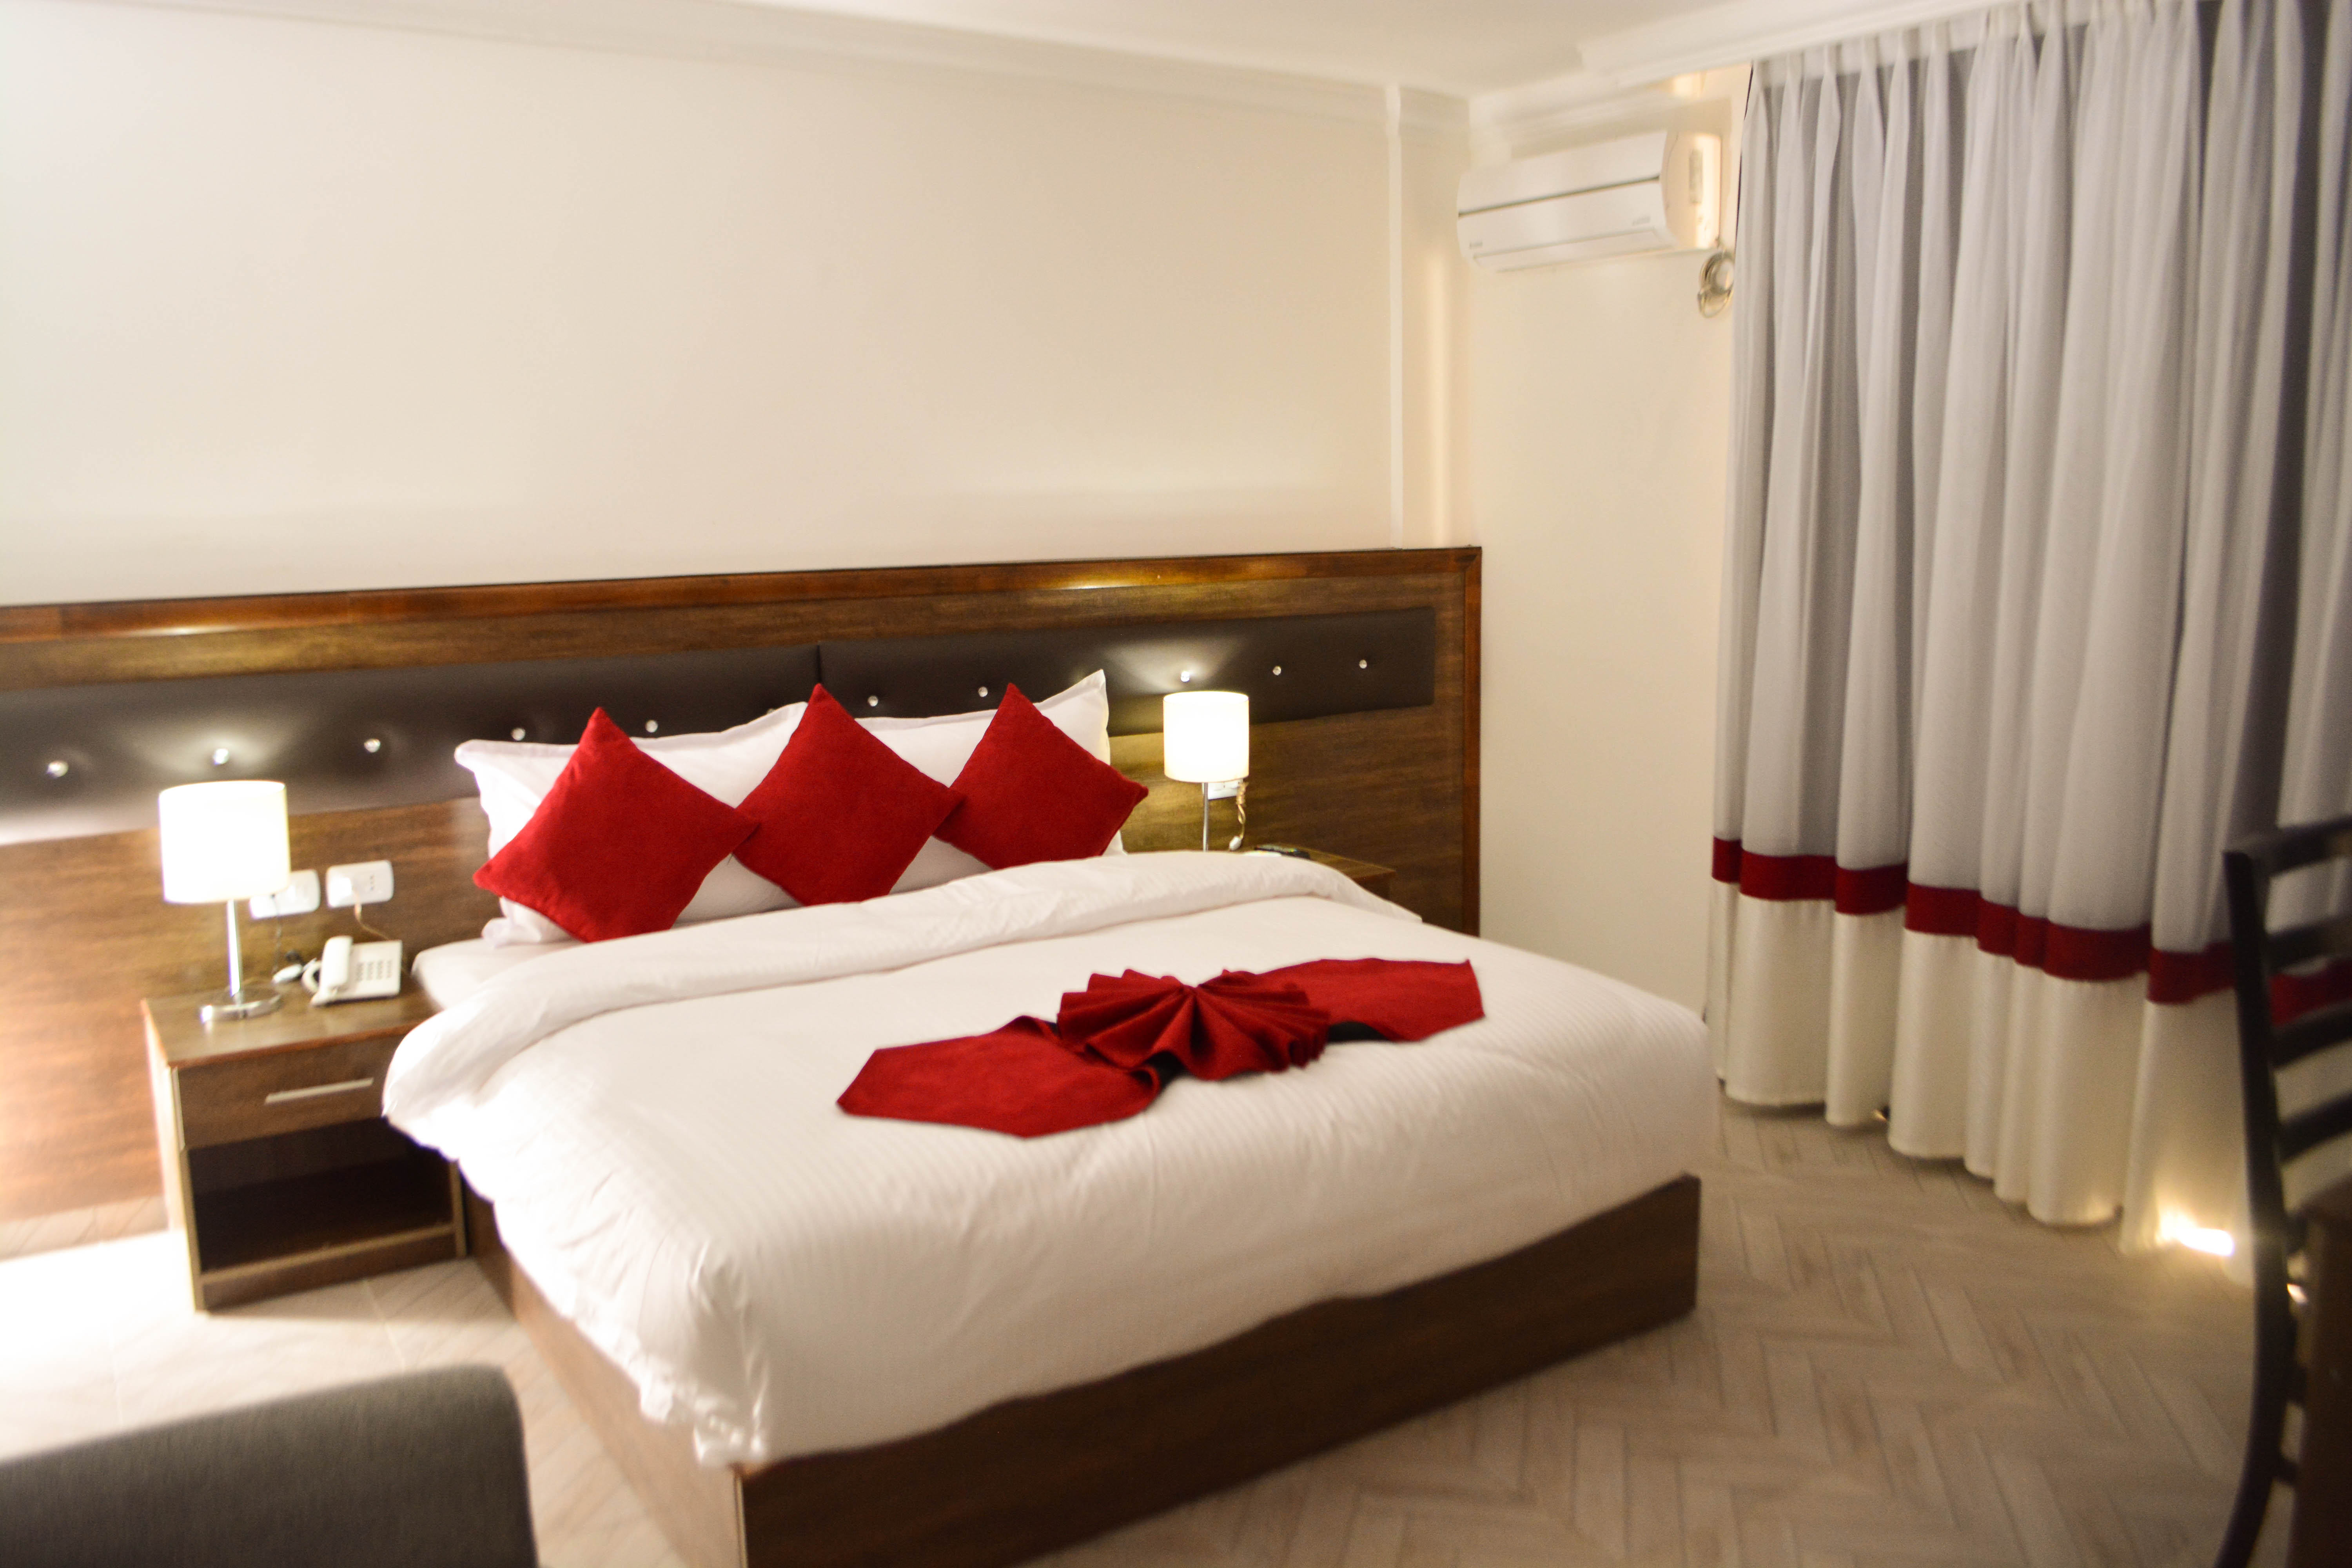 Petra Corner Hotel provides accommodations with a restaurant and free WiFi as well as free private parking